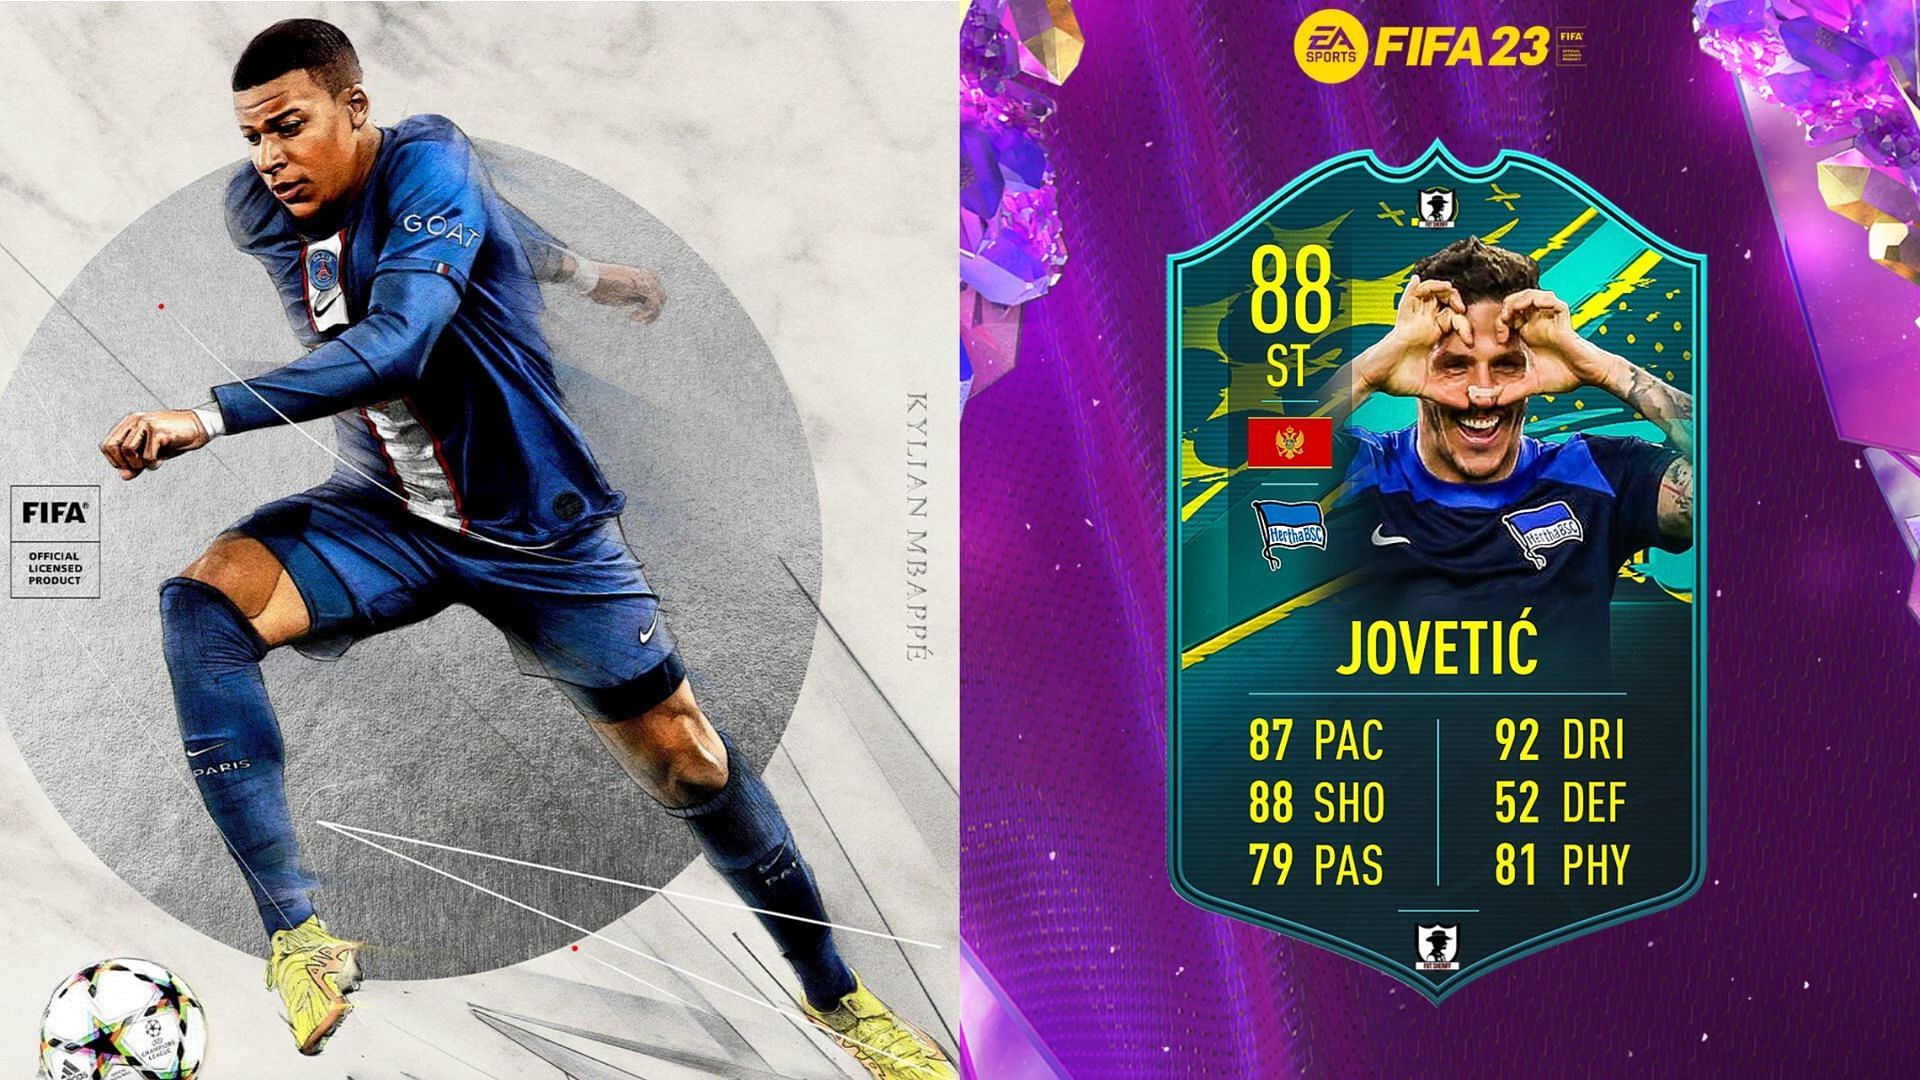 The Stevan Jovetic Moments SBC is set for a release in FIFA 23 (Images via EA Sports, Twitter/FUT Sheriff)